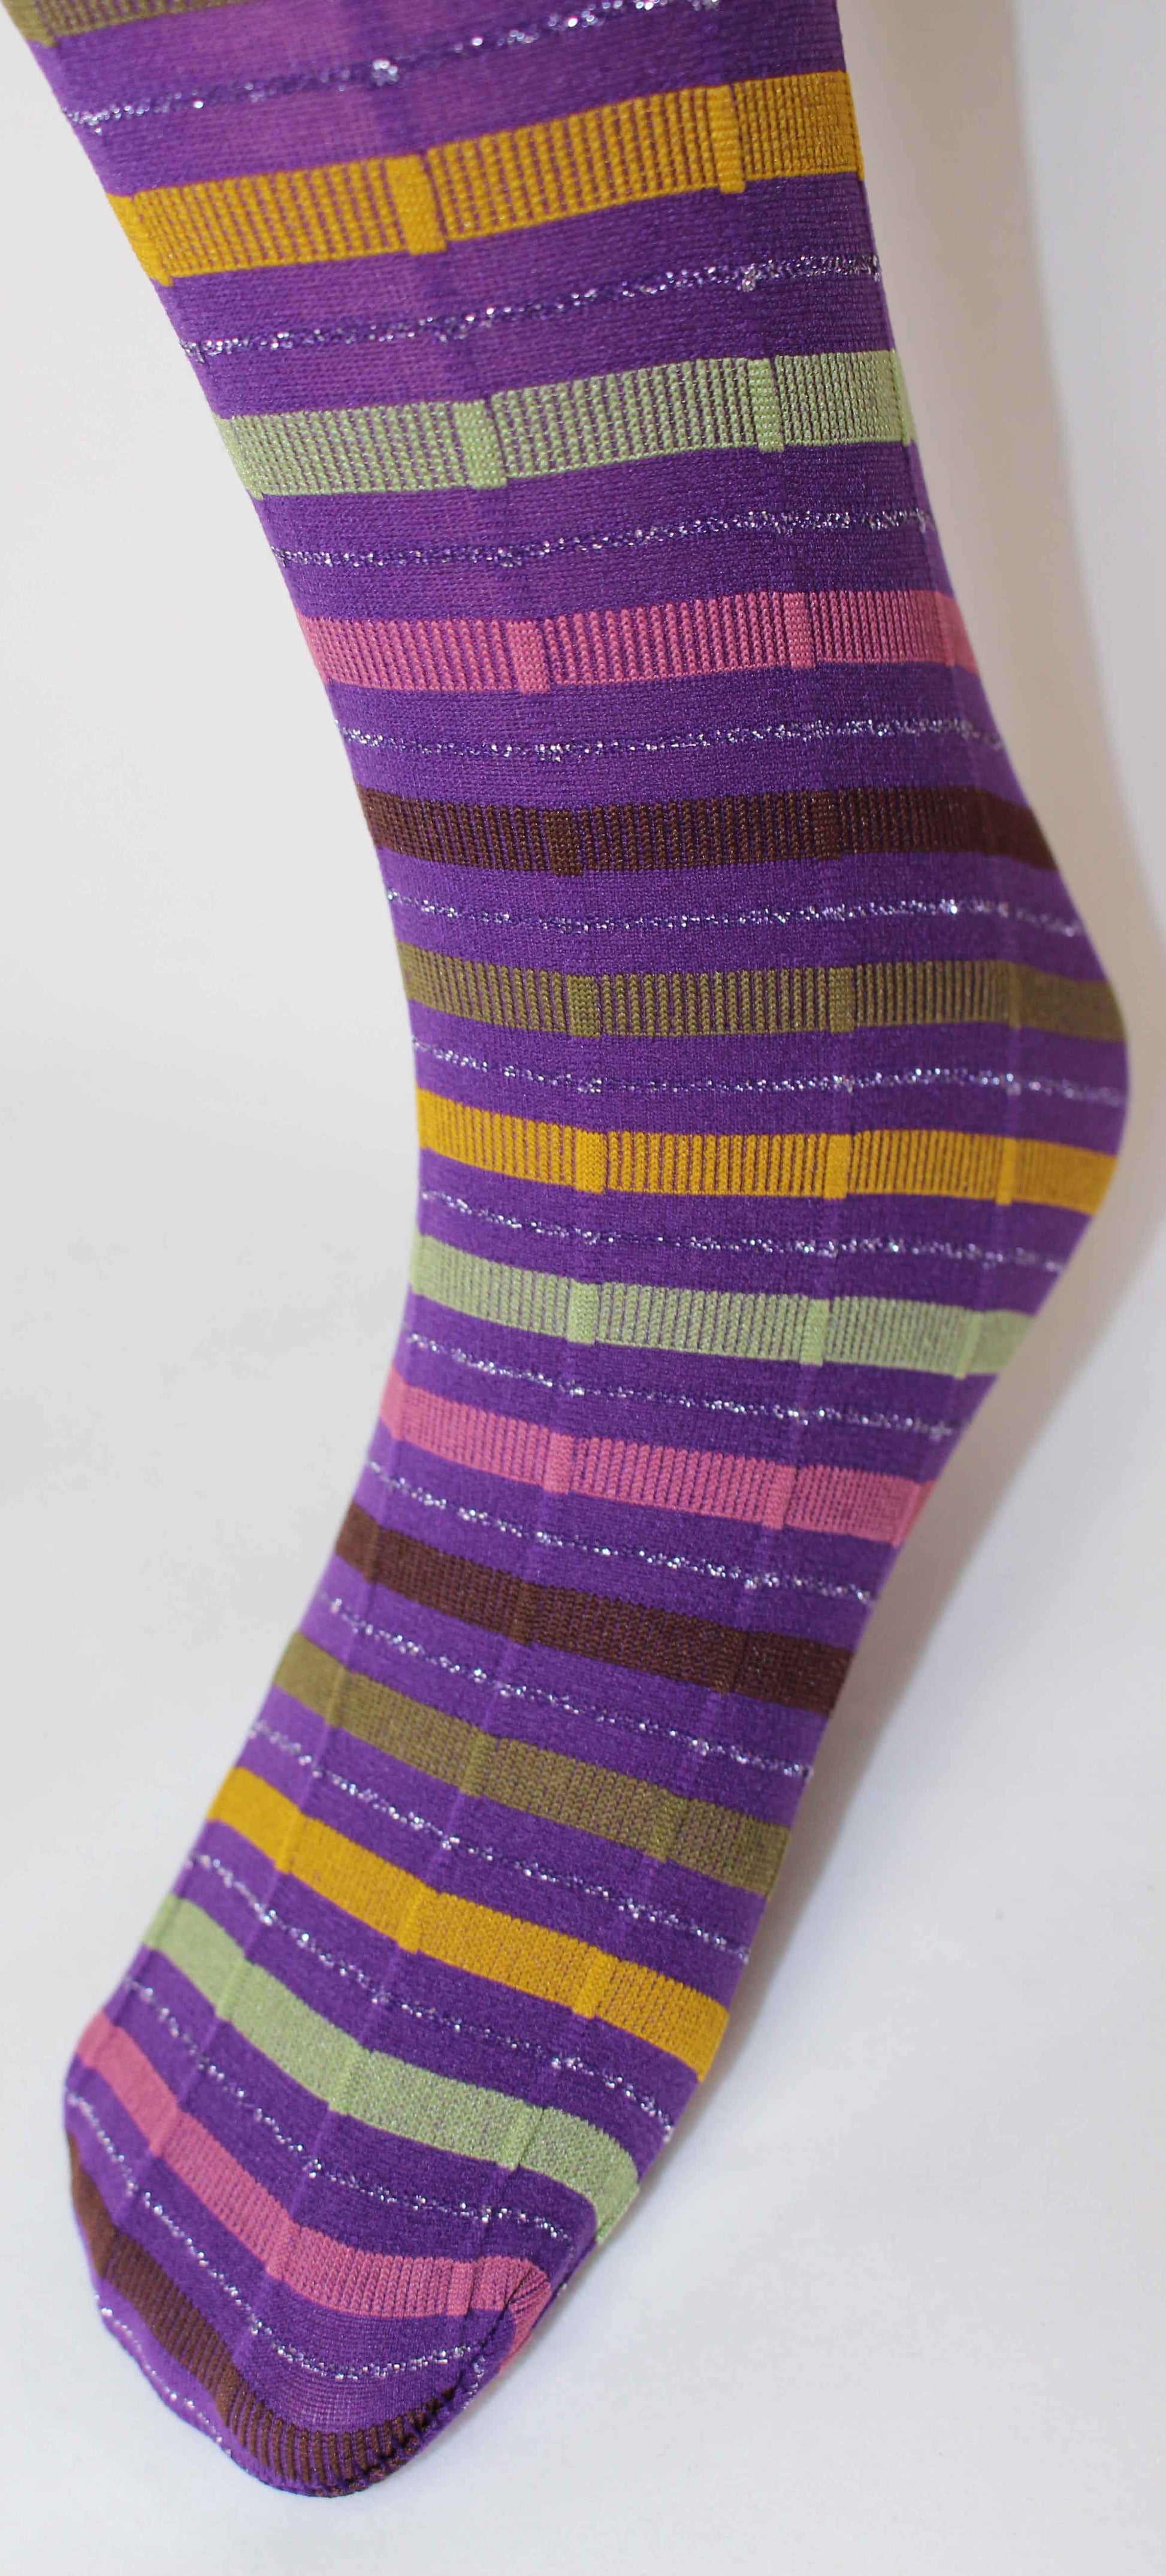 Omsa Serenella Festival Collant - Dark purple soft opaque children's fashion tights with a multicoloured horizontal striped pattern in brown, khaki green, pale pink, mustard, sage green and sparkly silver and a subtle vertical stripe rib.